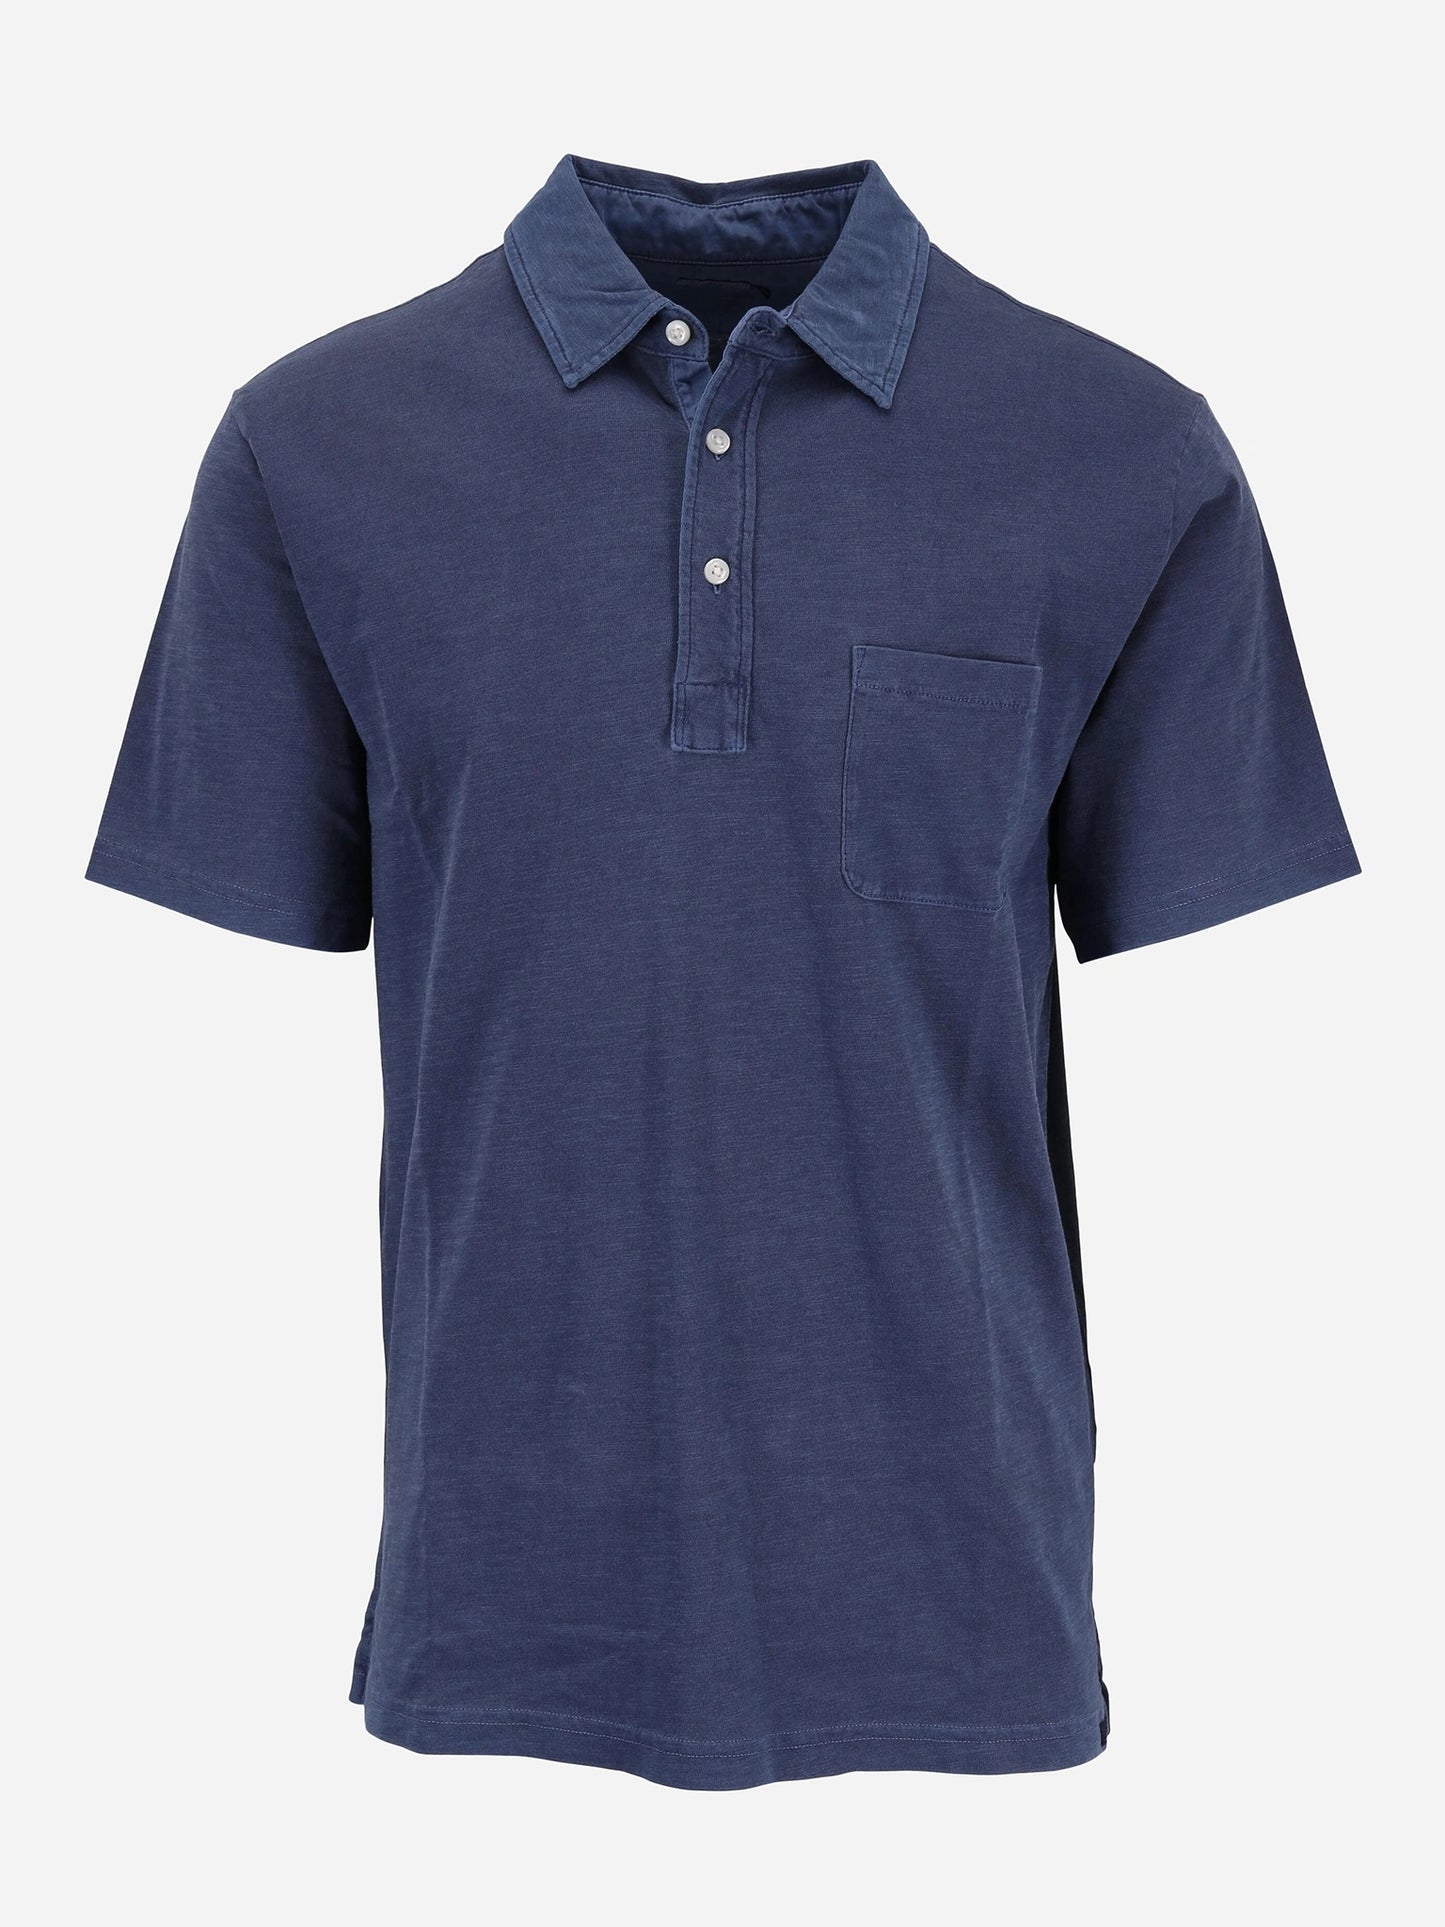 Faherty Brand Men's Sunwashed Polo